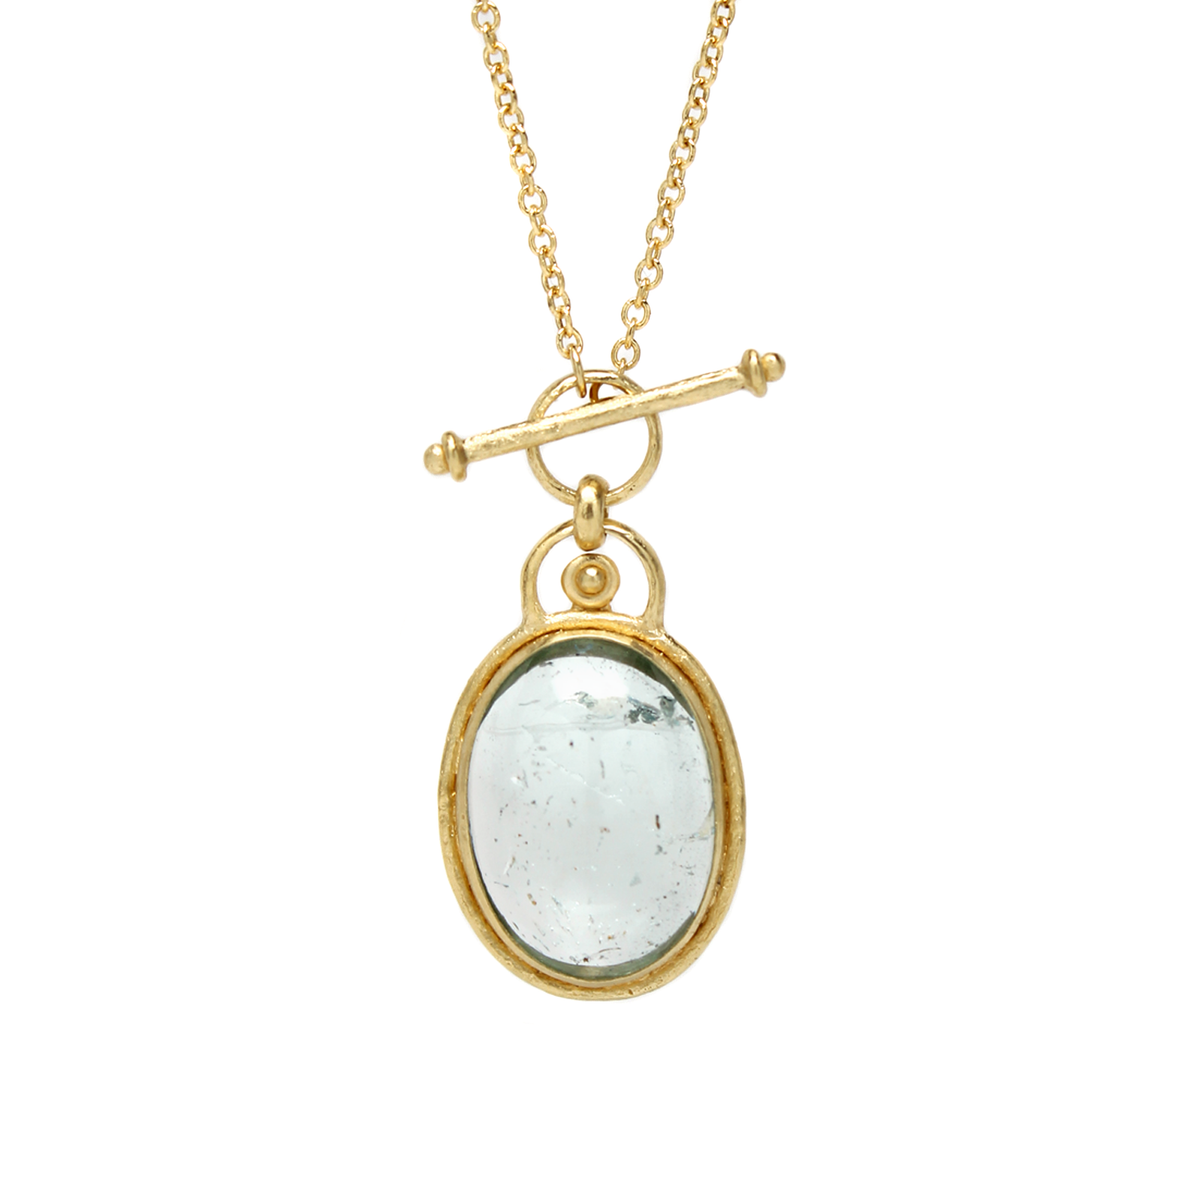 One-of-a-Kind Oval Aquamarine Necklace with Toggle